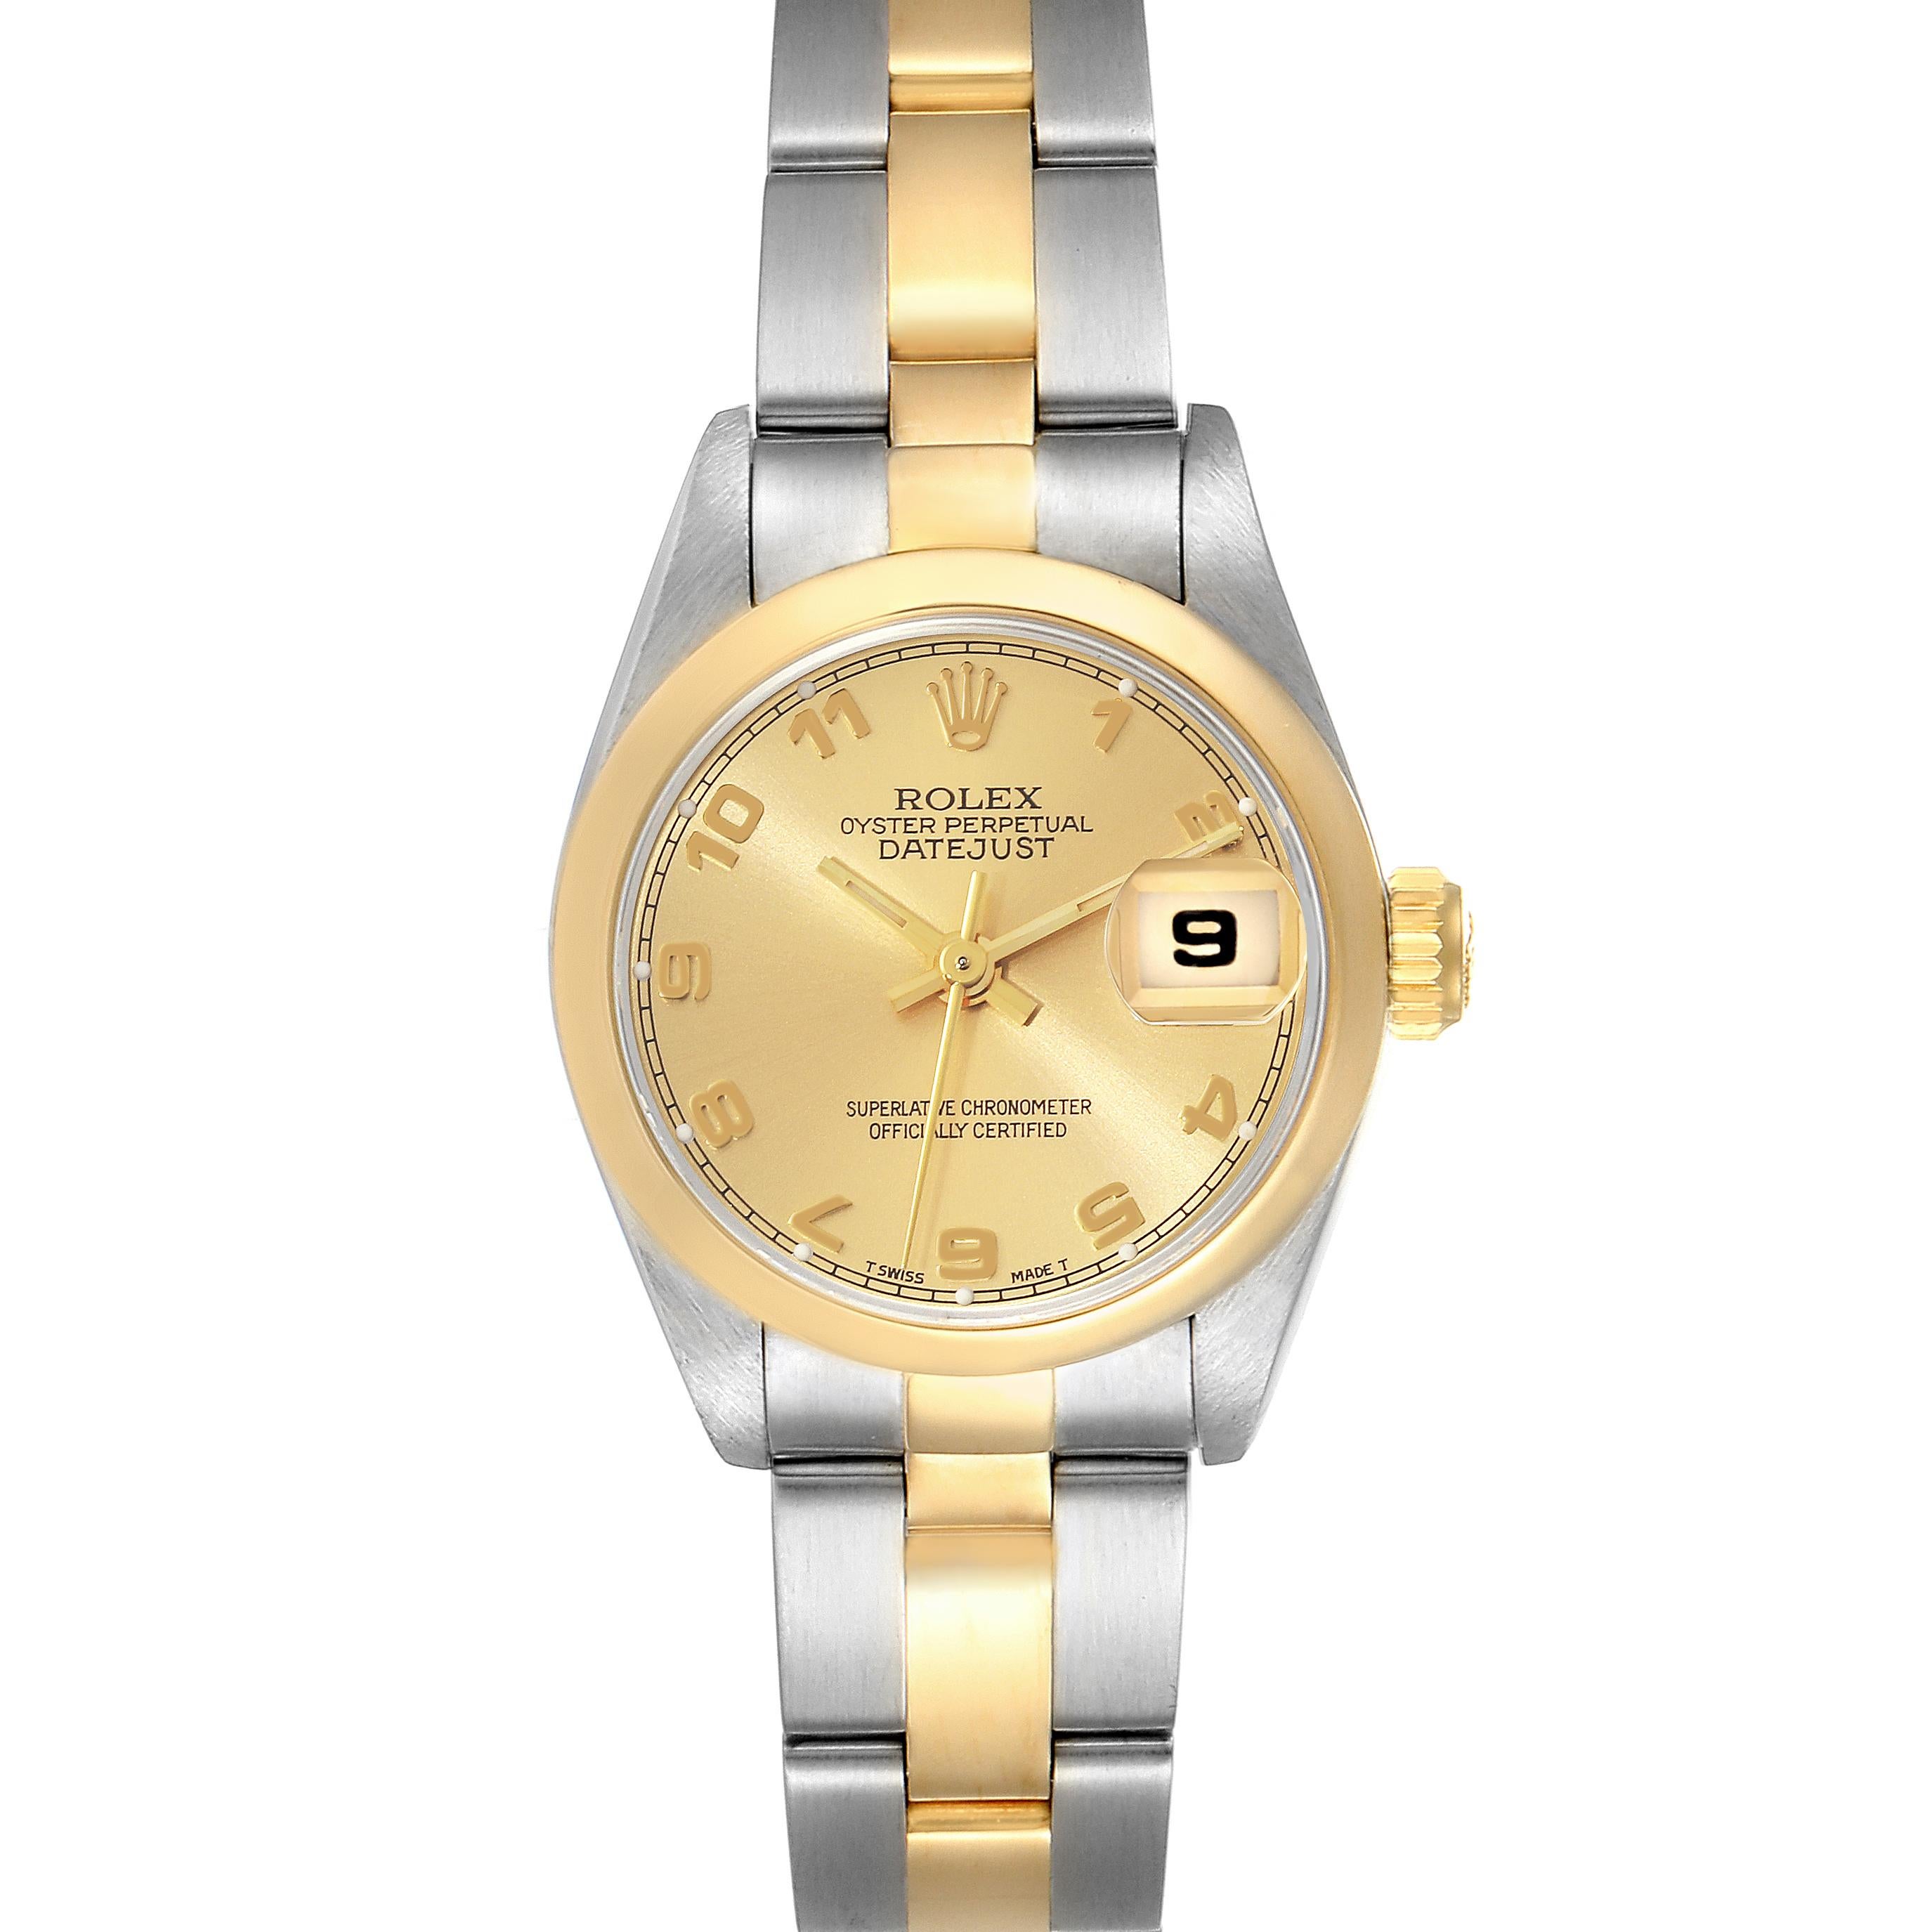 Rolex Datejust Steel Yellow Gold Ladies Watch 69163 Box Papers. Officially certified chronometer self-winding movement. Stainless steel oyster case 26.0 mm in diameter. Rolex logo on a crown. 18k yellow gold smooth bezel. Scratch resistant sapphire